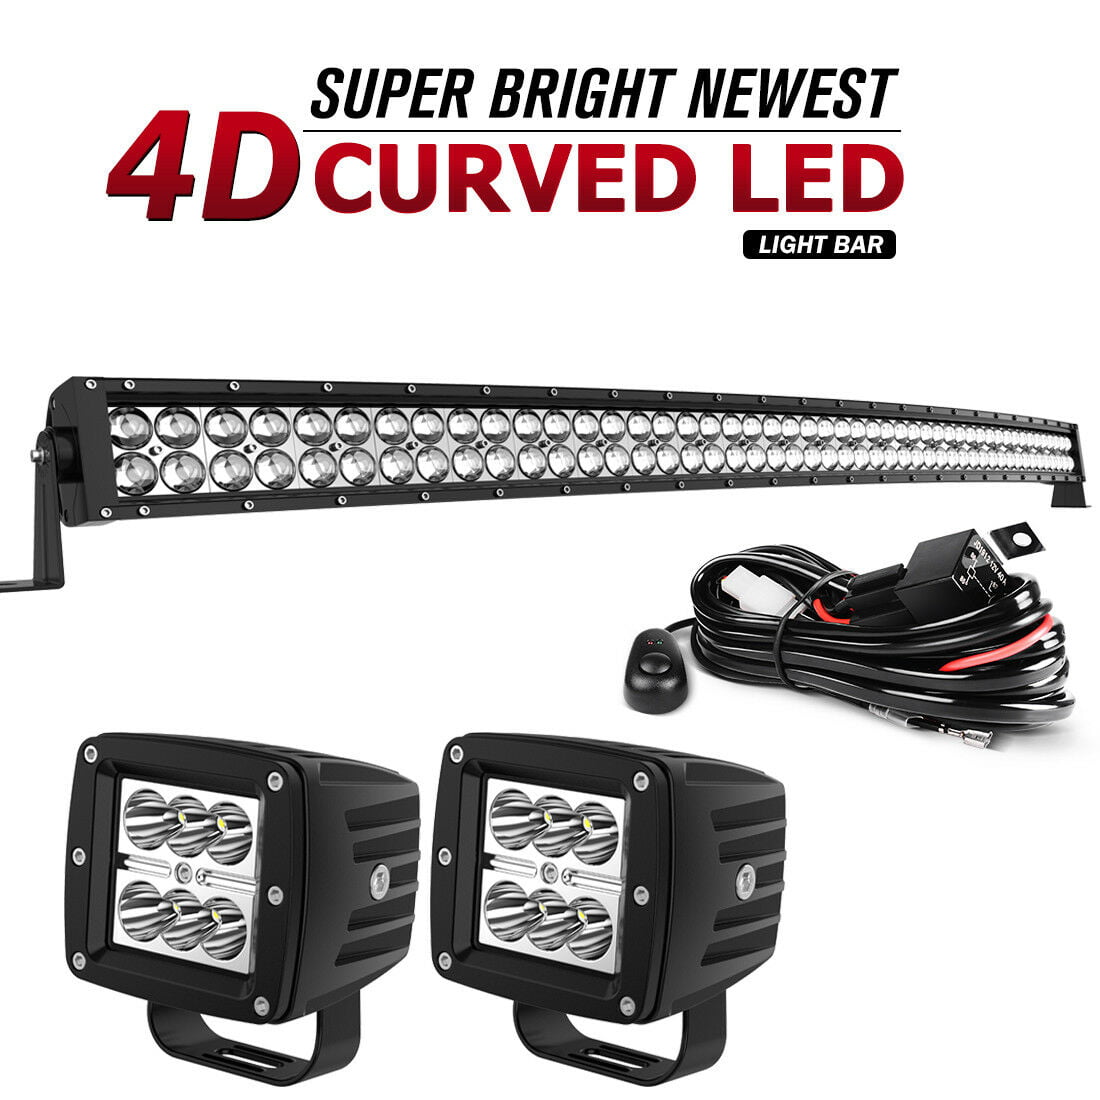 Curved 50'' LED Work Light Bar Driving Truck 2X 4'' 18W Pods Combo ATV Offroad